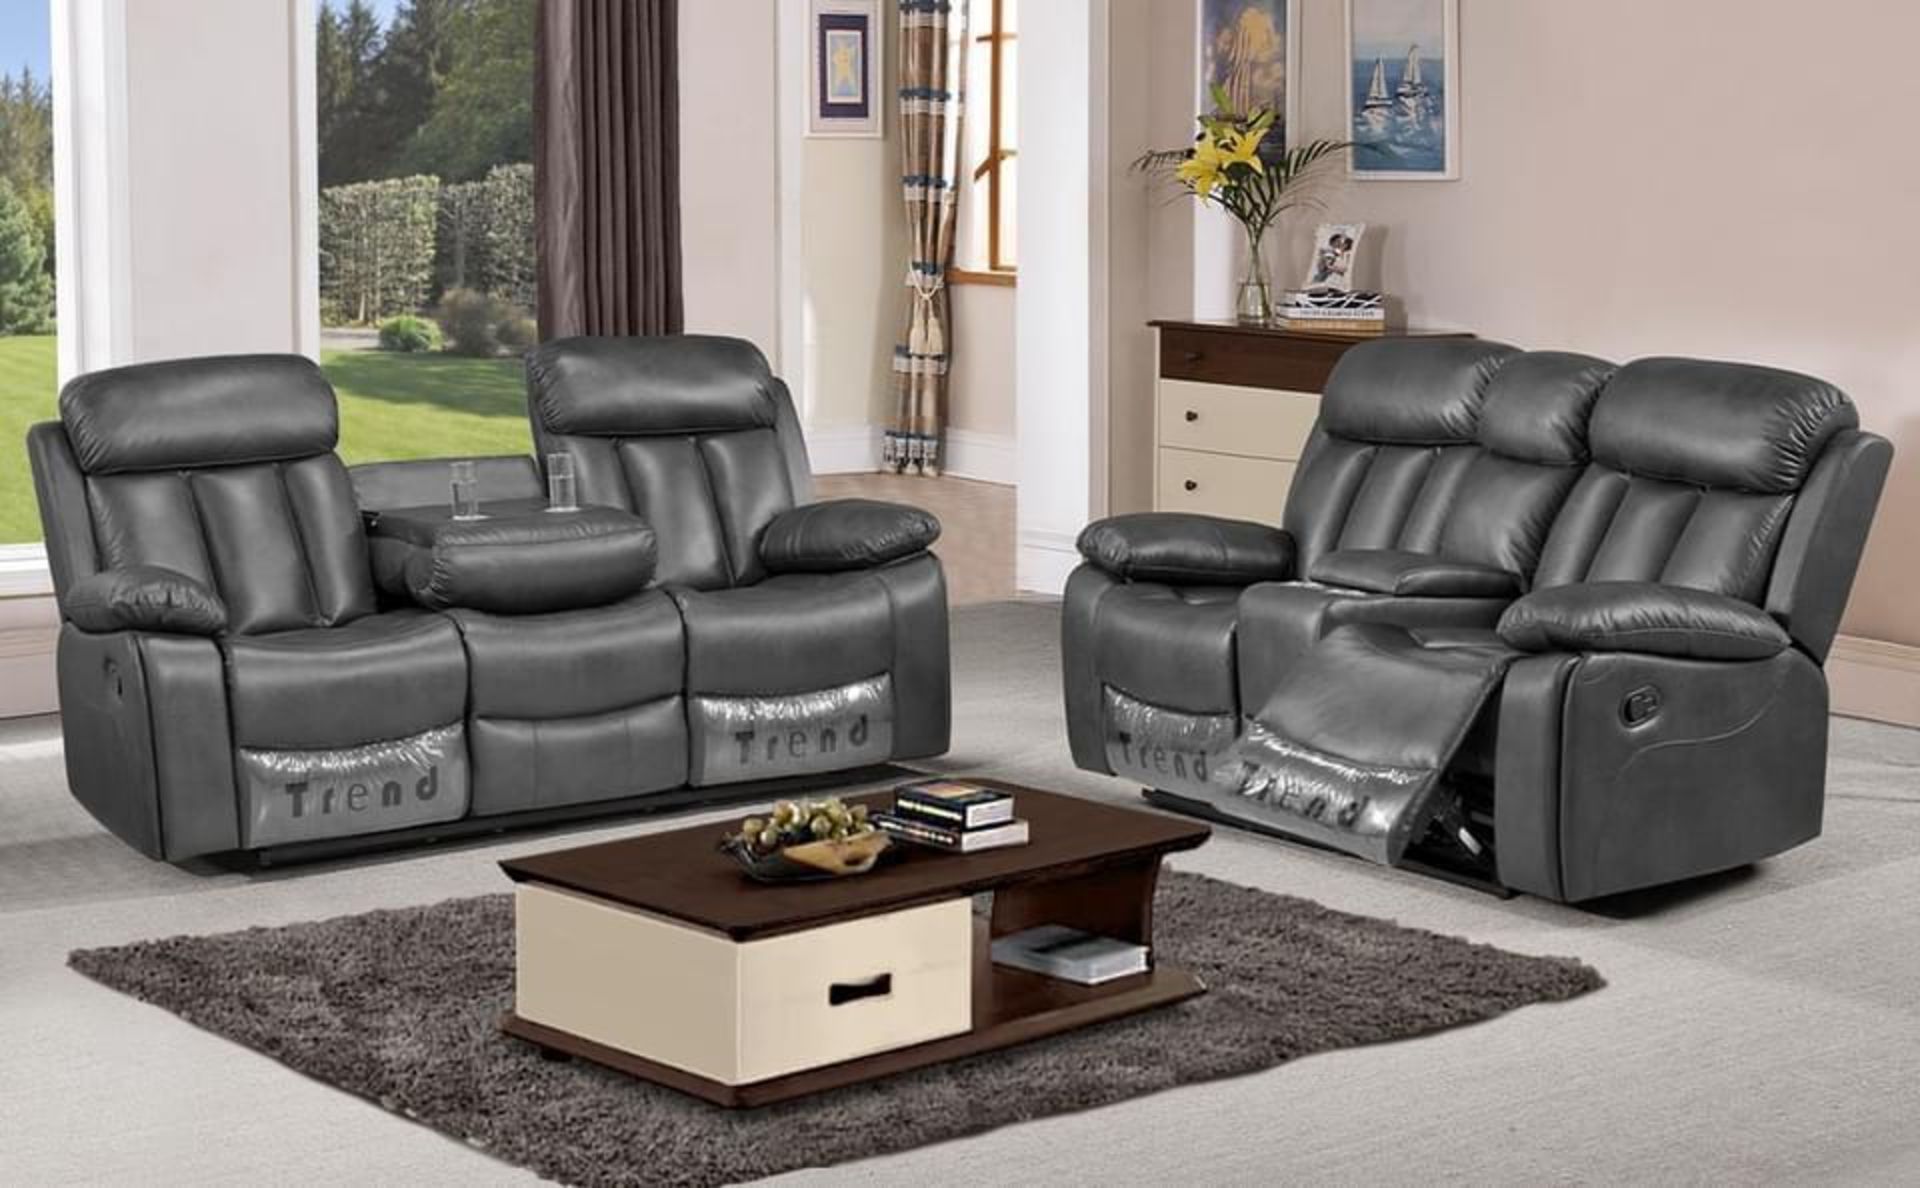 Brand new and boxed Somerton Leathaire 3 + 2 seater manual recliner in Grey. RRP: £1,500.00